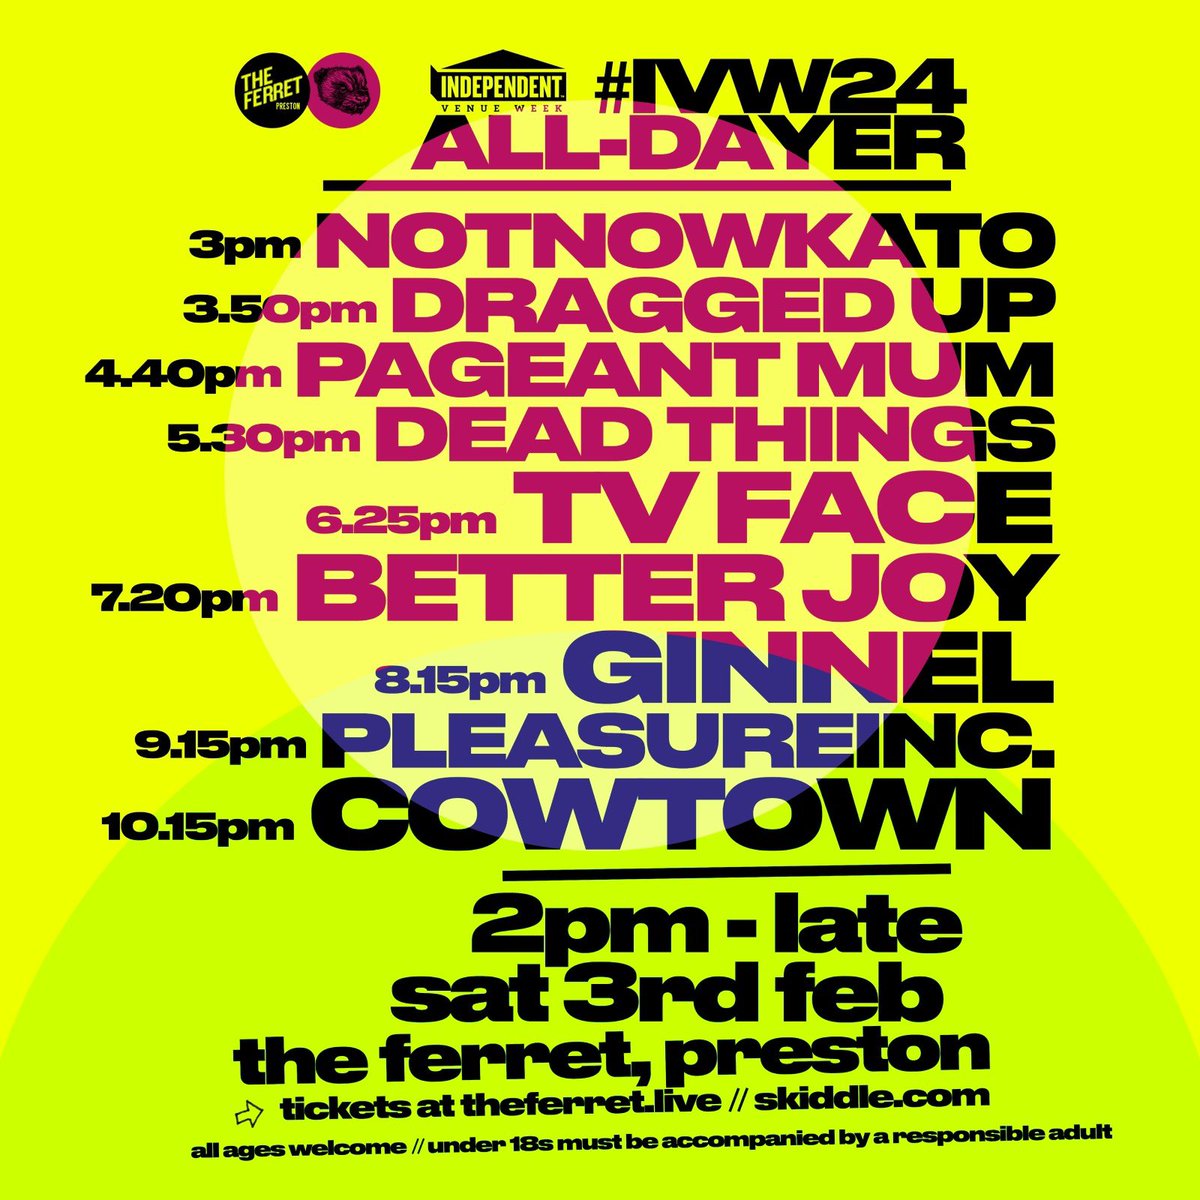 Times for our incredible #ivw24 all-dayer today! 9 fantastic bands, non-stop entertainment, we’re outrageously good to you tbf…

2pm doors
3pm Notnowkato
3:50 Dragged Up
4:40 Pageant Mum
5:30 dead things
6:25 TV FACE
7:20 Better Joy
8:15 Ginnel
9:15 PleasureInc.
10:15 COWTOWN